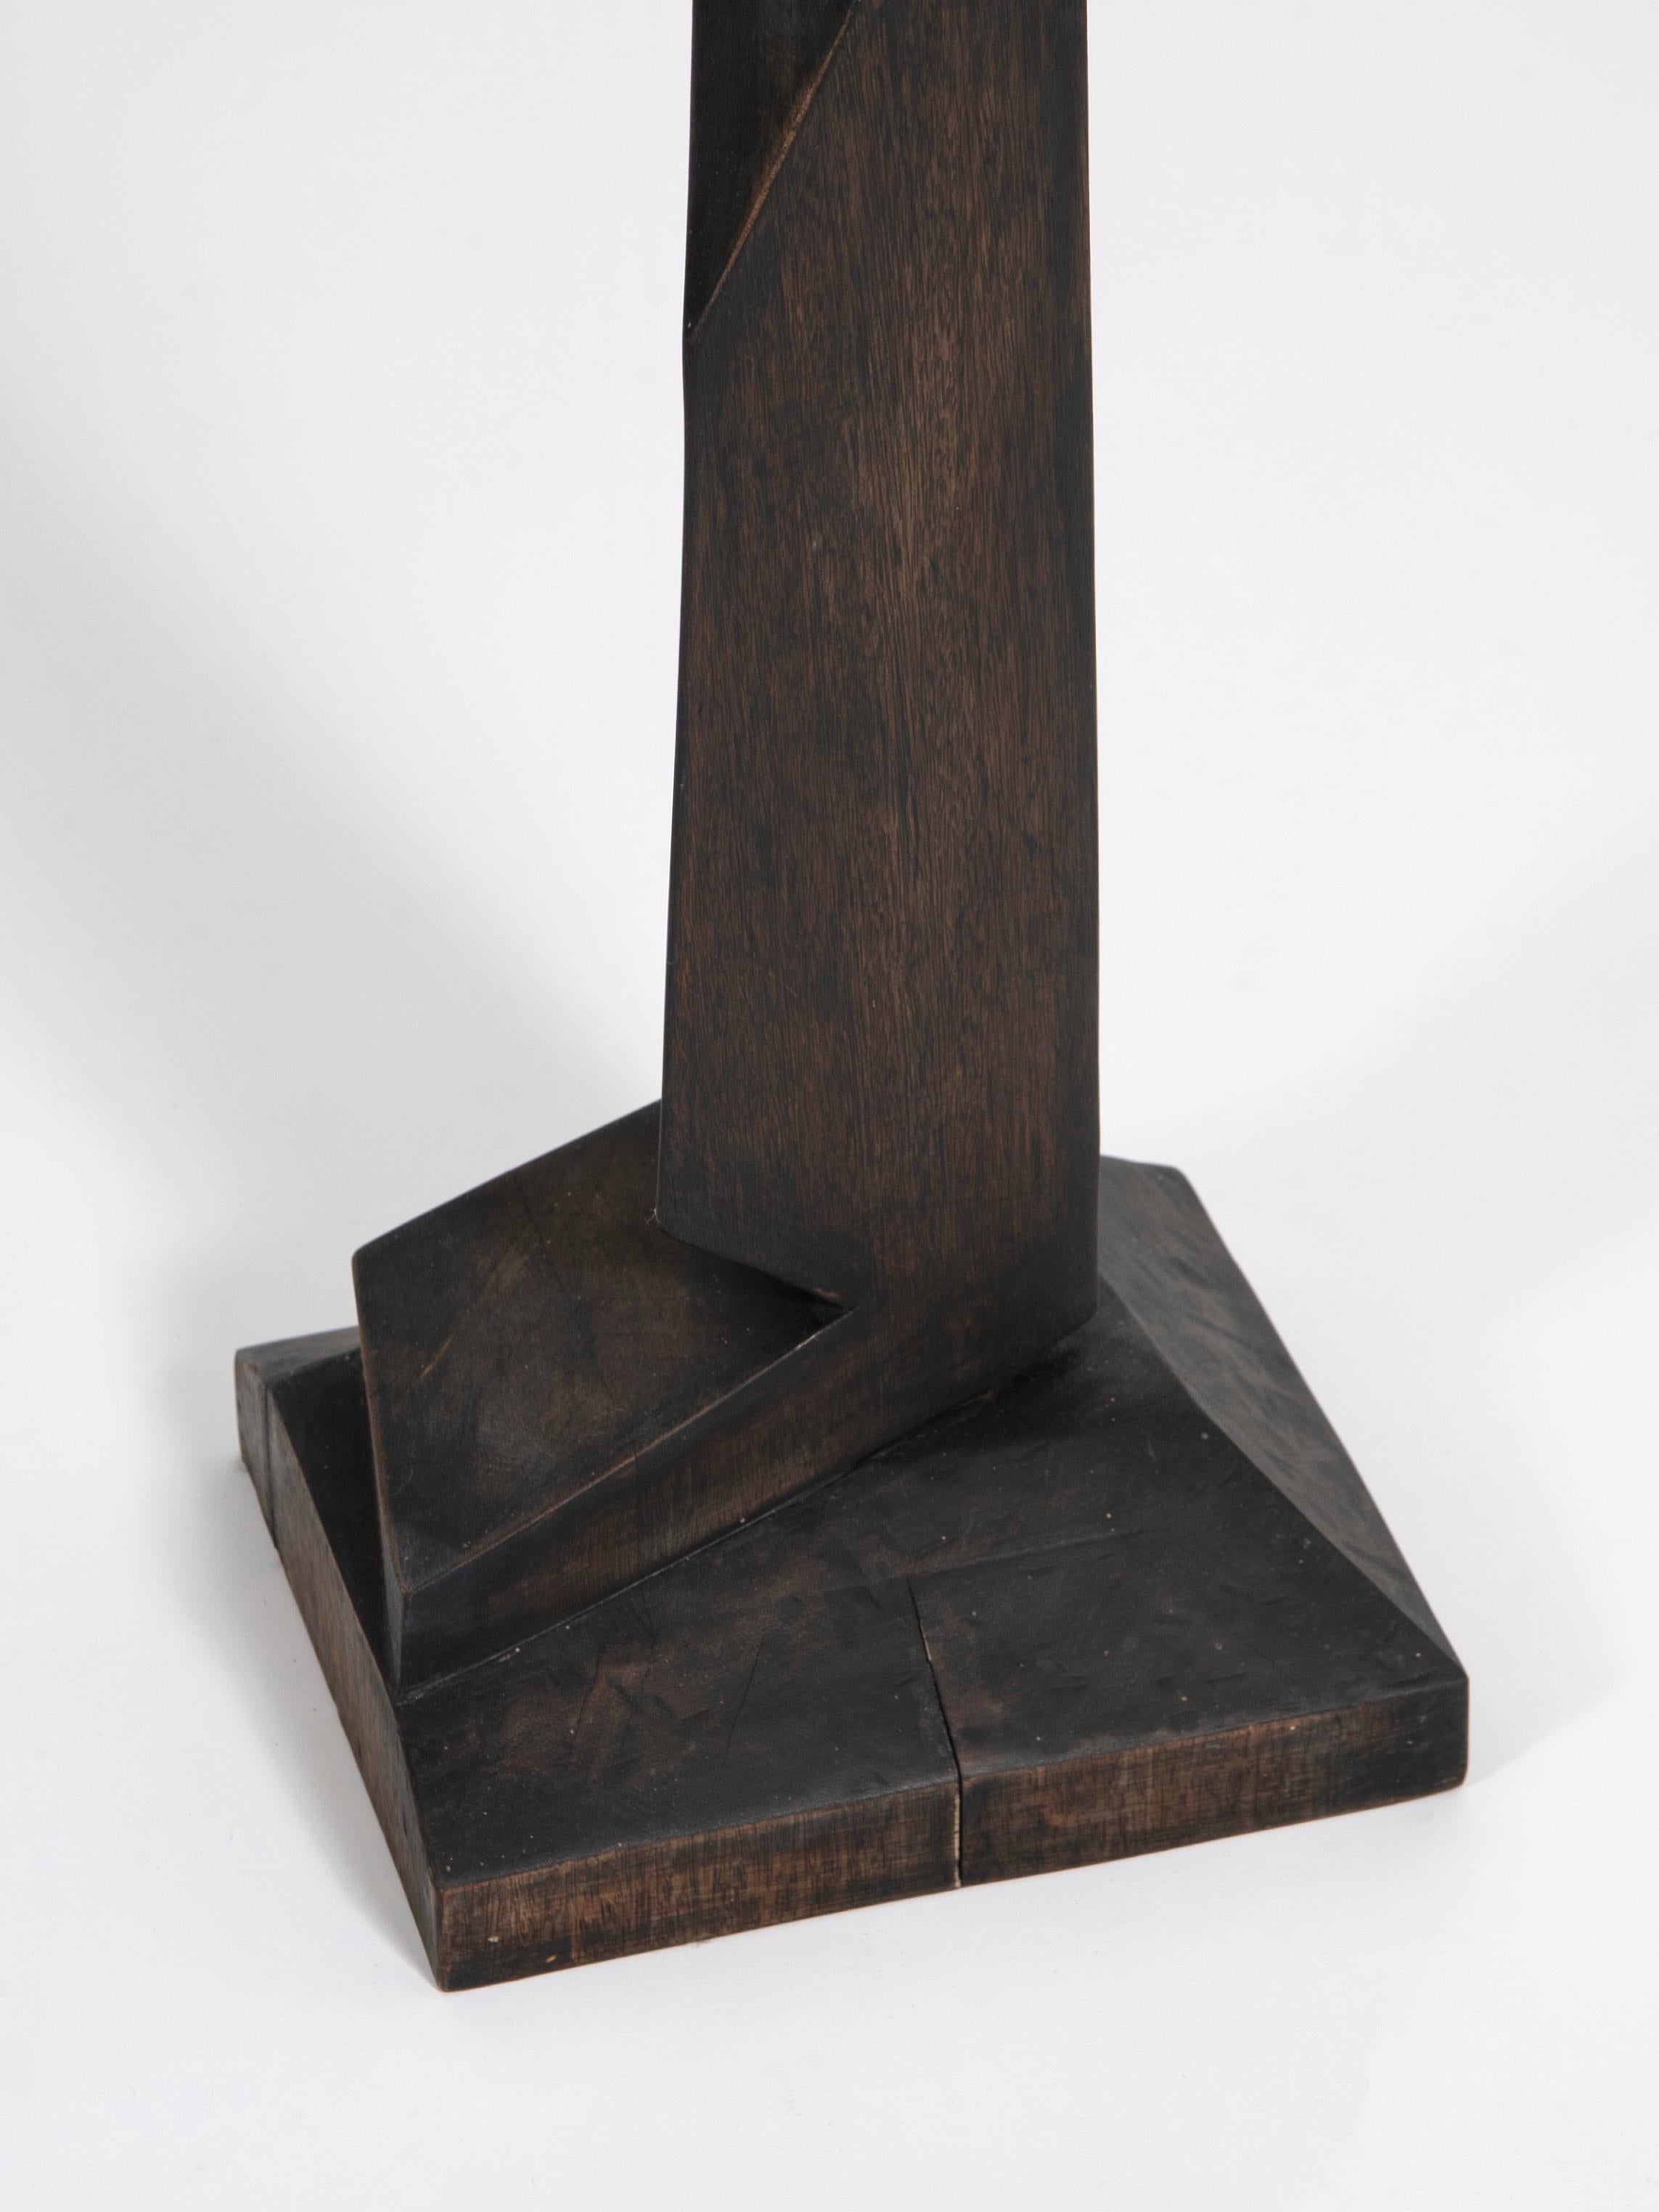 Wood 20th Century Modern Abstract TOTEM Sculpture by Bertrand Créach For Sale